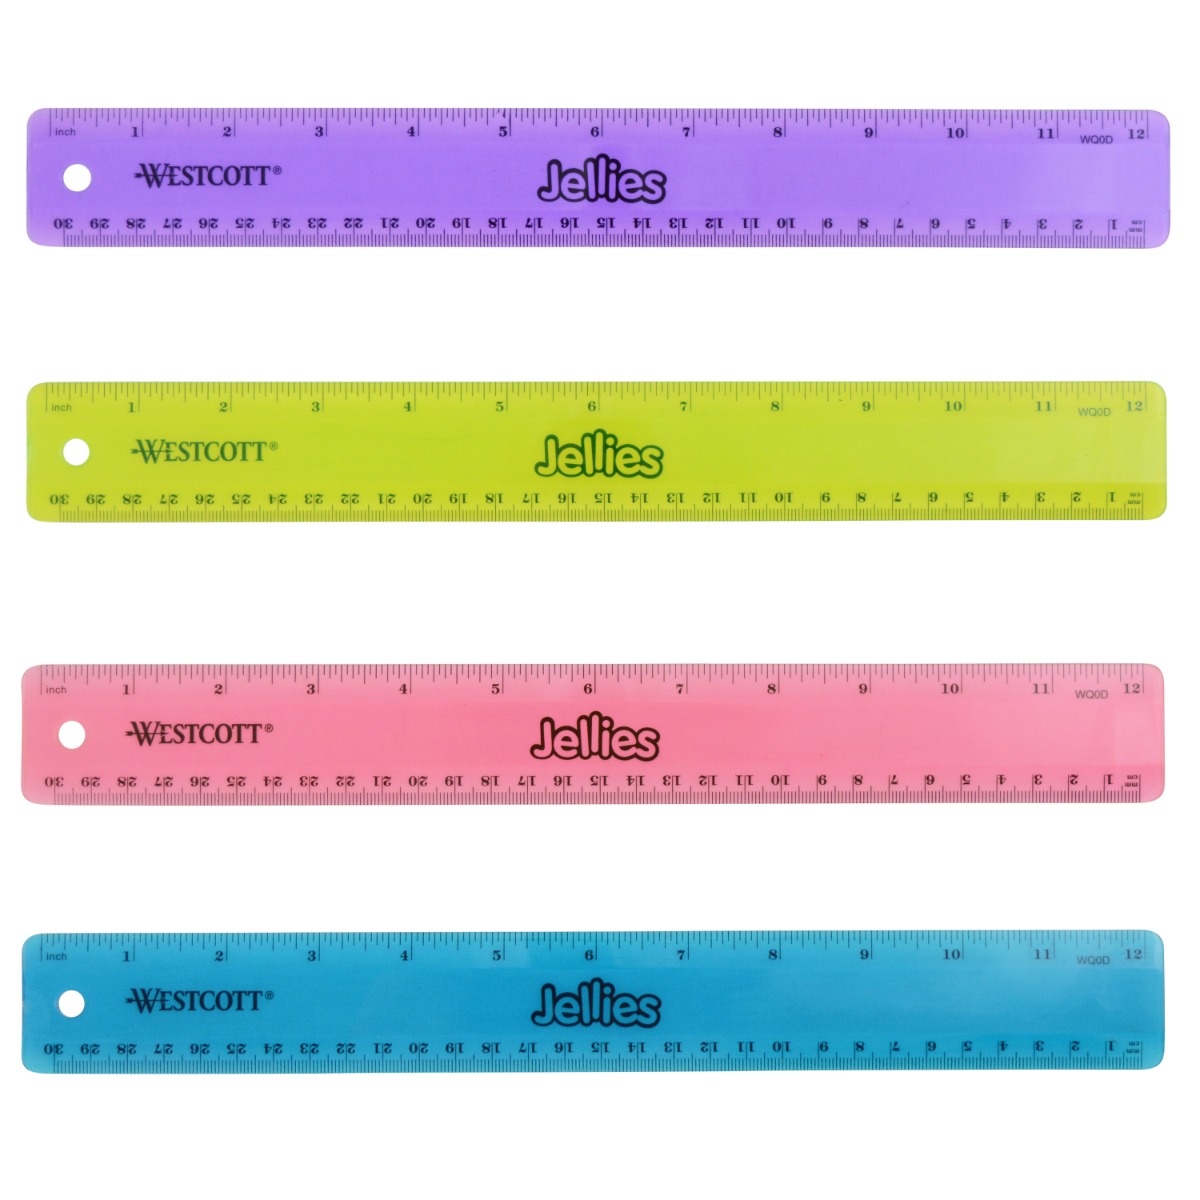 Professional Safety Cutting Ruler 12 (30cm)